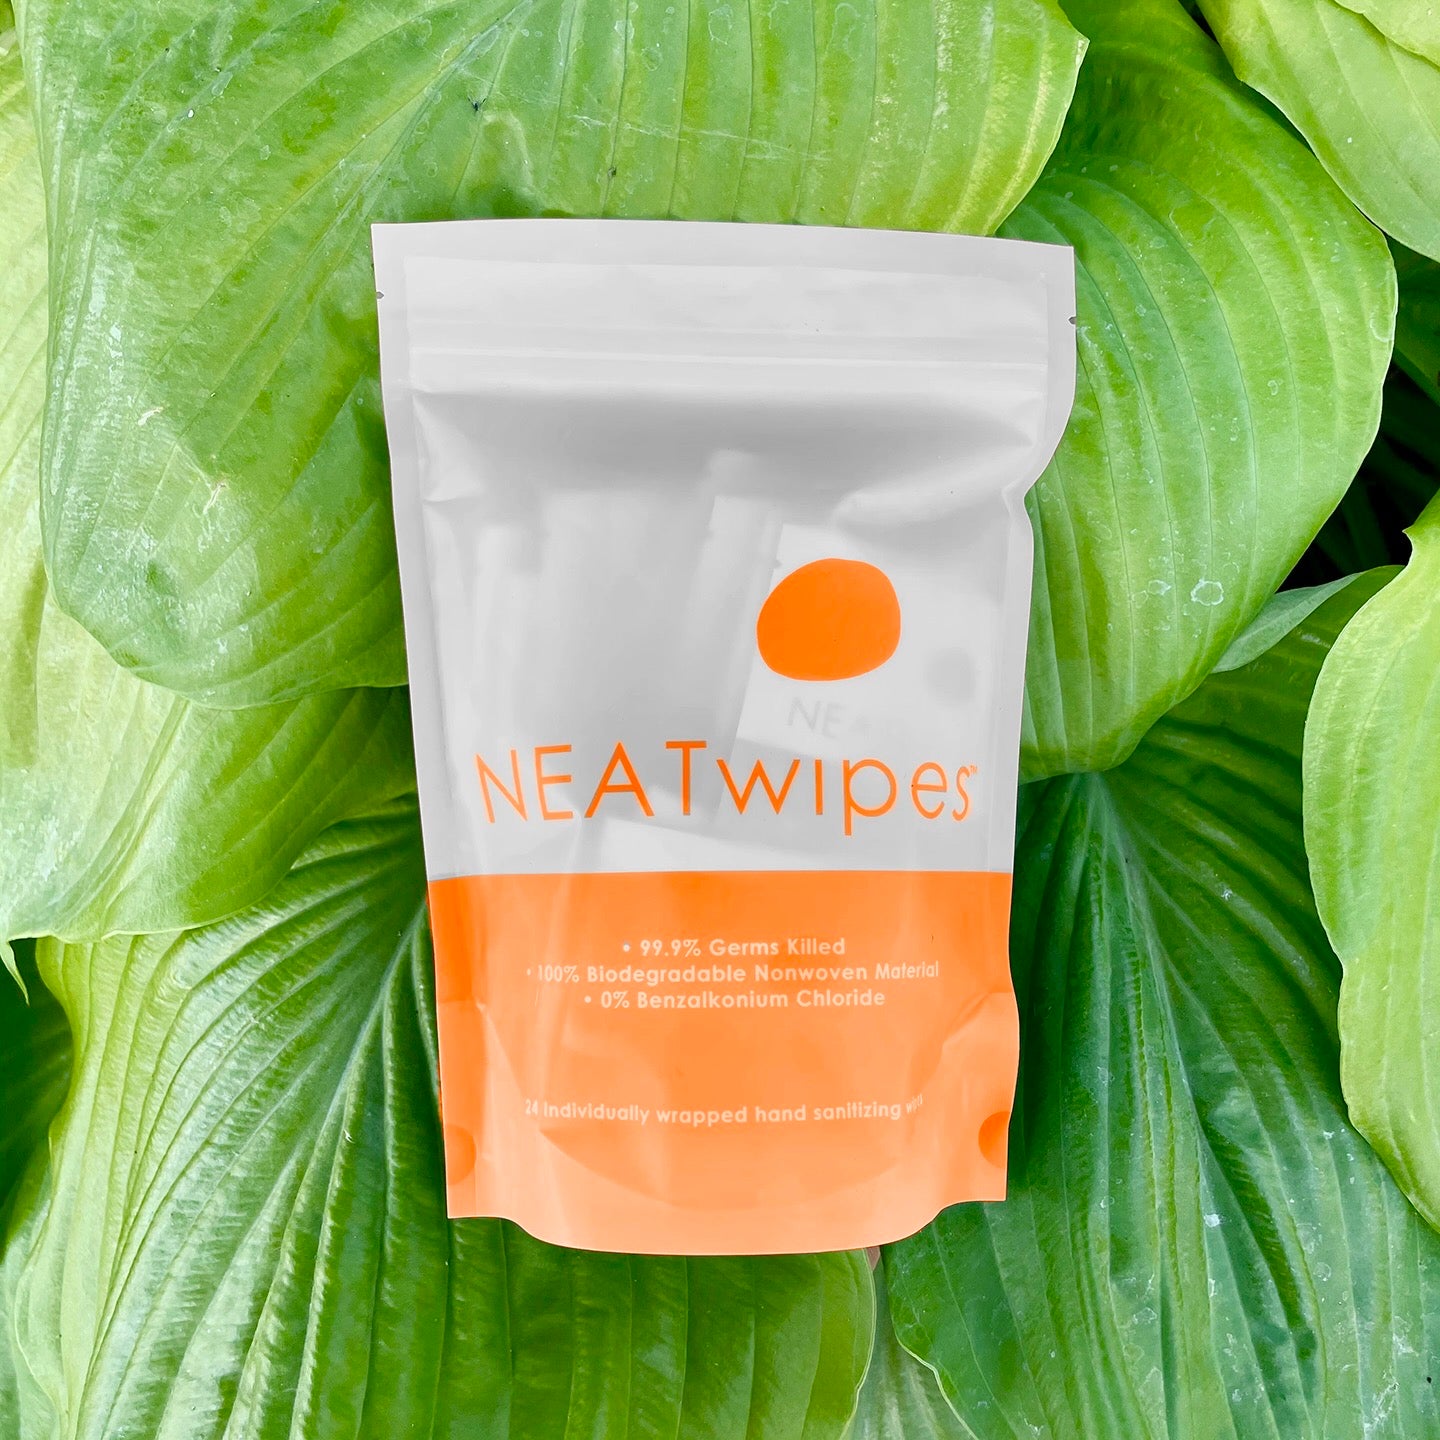 A 24-Count pouch of NEATwipes Fresh Citrus hand wipes.